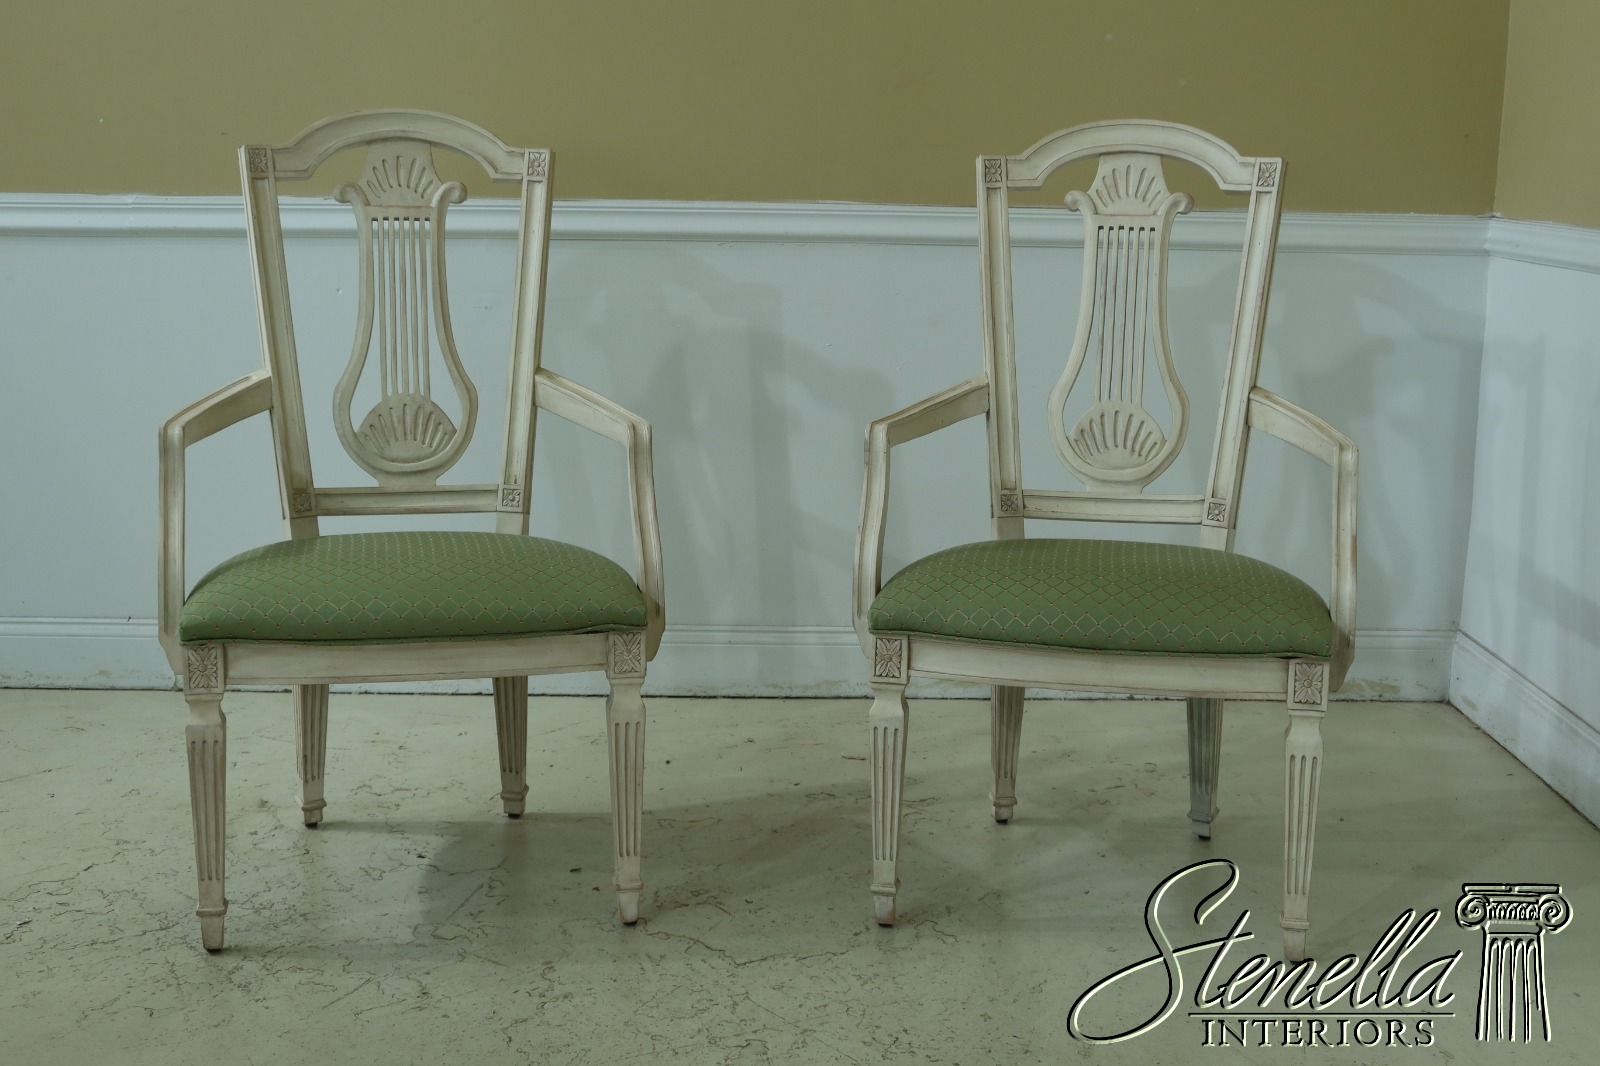 Painted Dining Room Chairs For Sale